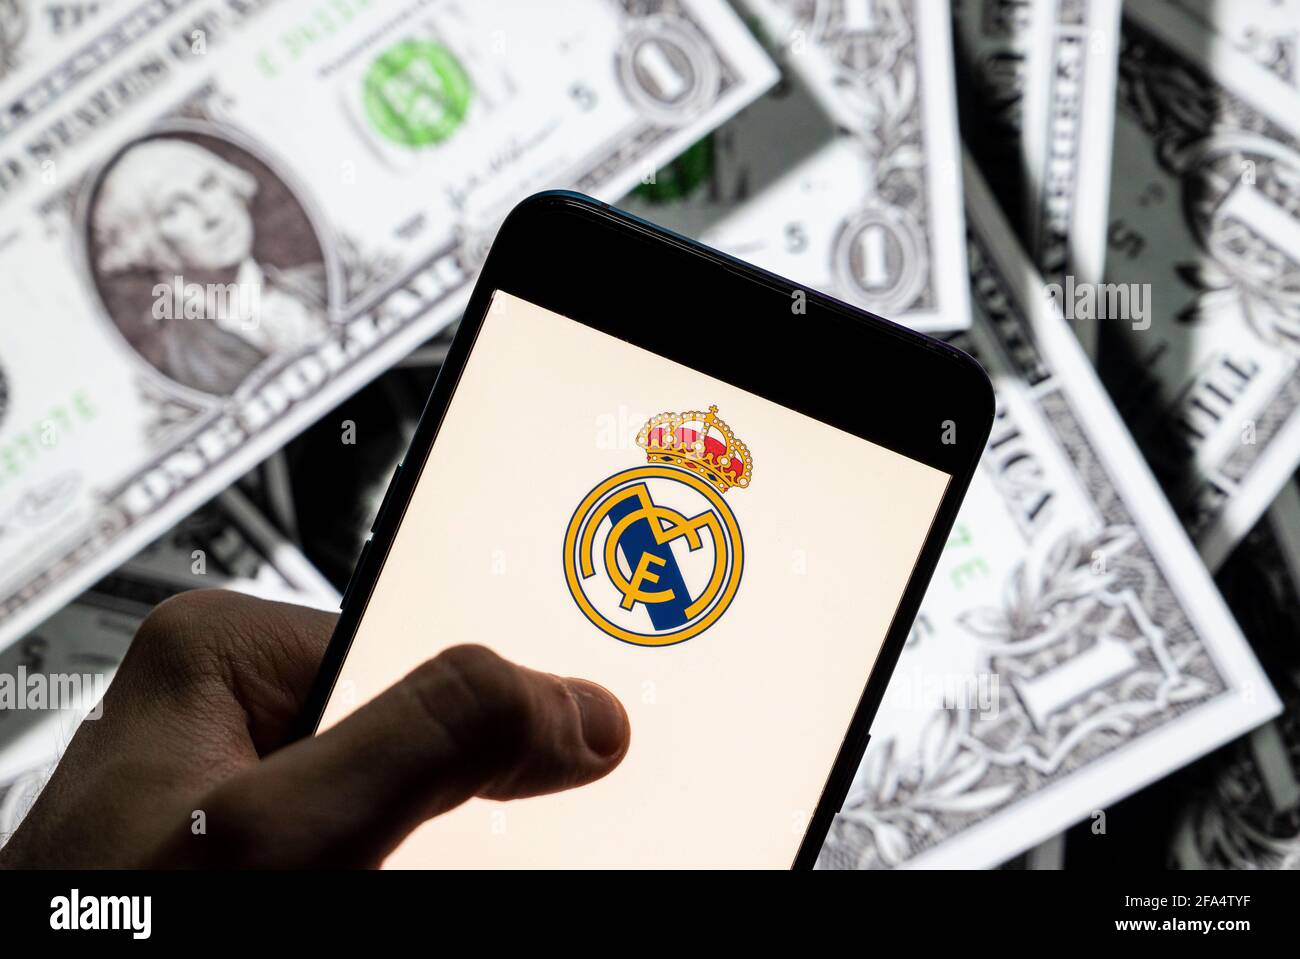 China. 21st Apr, 2021. In this photo illustration Spanish professional football club team Real Madrid Club de FÃºtbol commonly known as Real Madrid logo seen on an Android mobile device screen with the currency of the United States dollar icon, $ icon symbol in the background. Credit: Budrul Chukrut/SOPA Images/ZUMA Wire/Alamy Live News Stock Photo